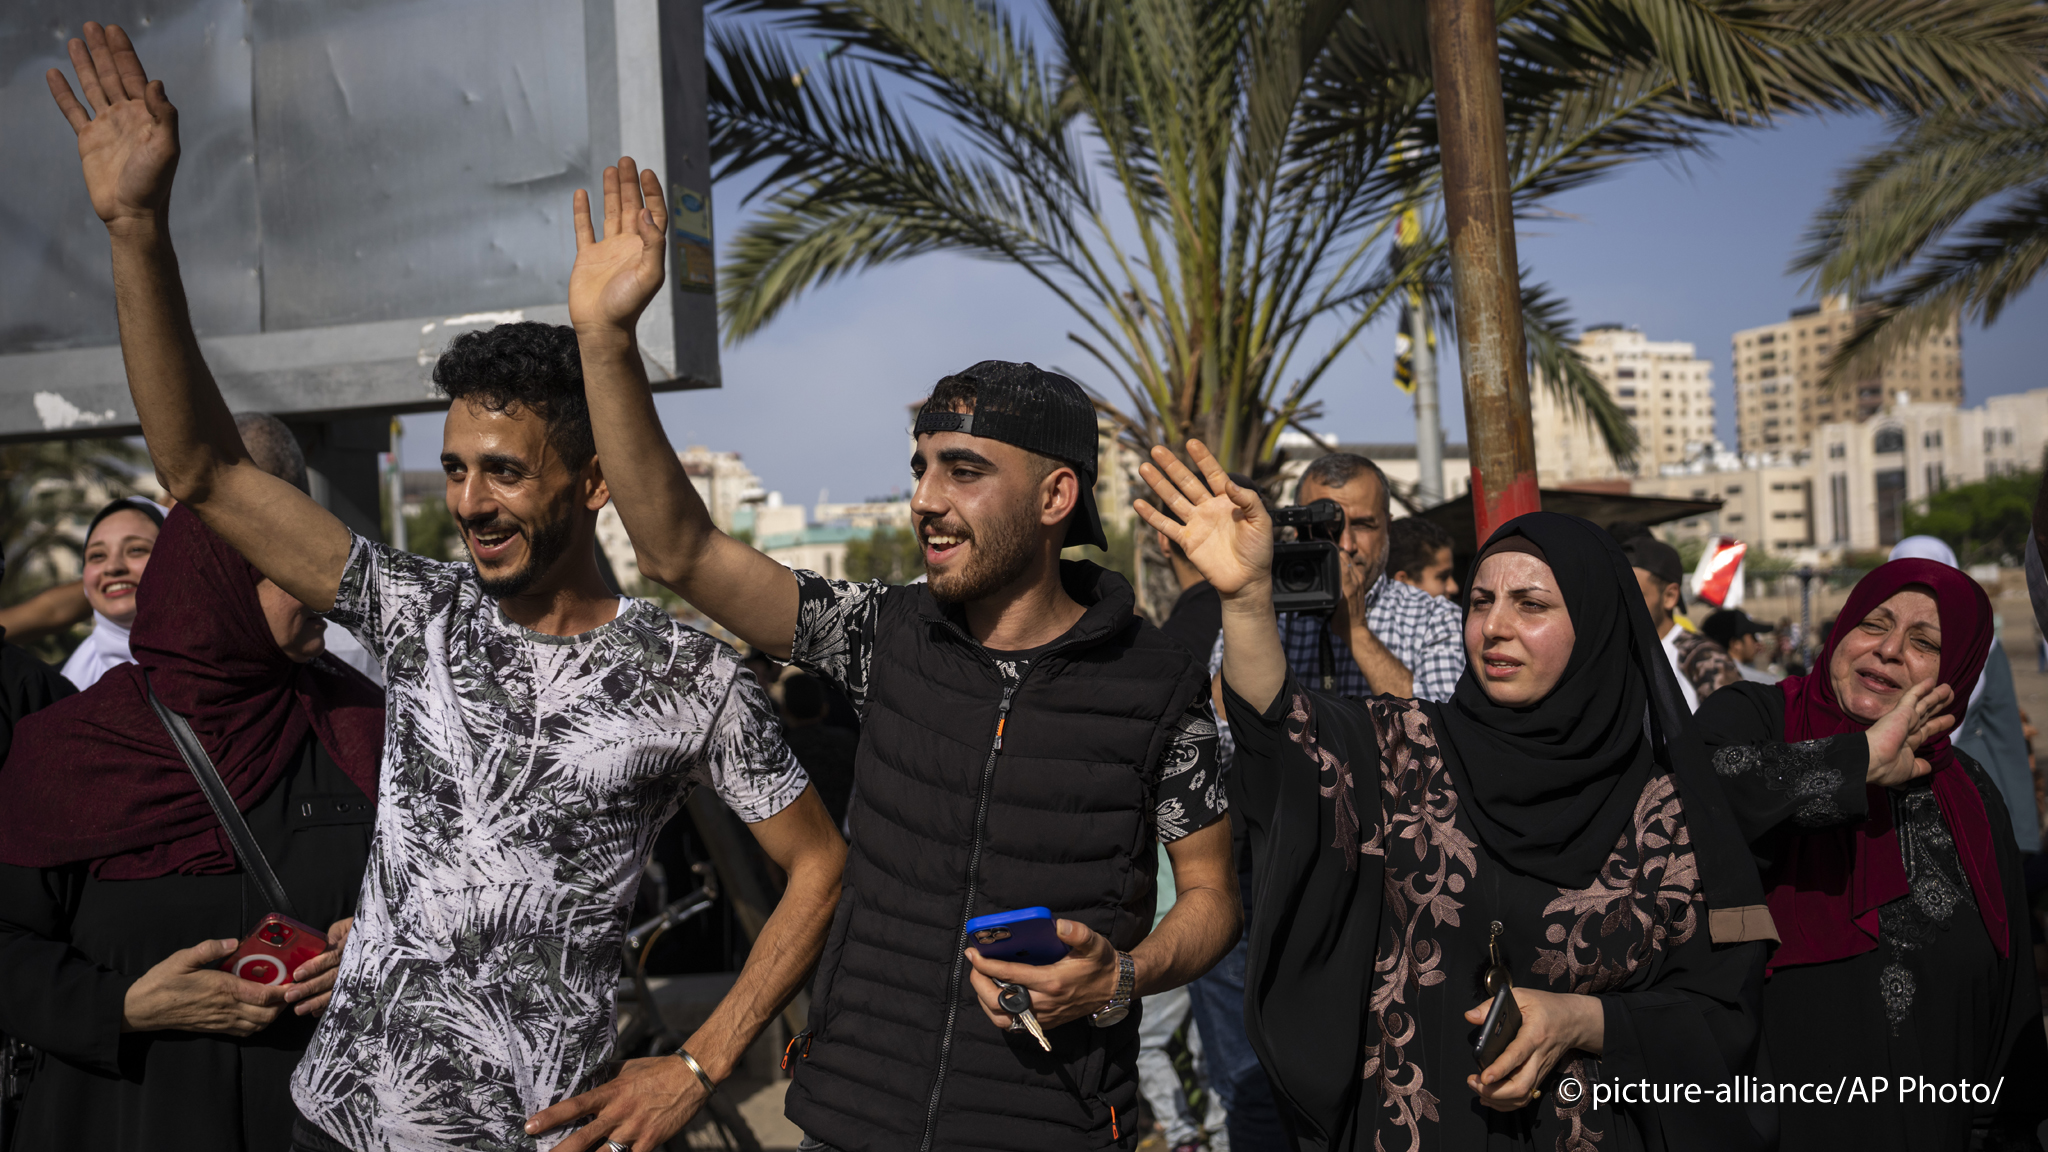 Relatives of Huda Zaqqout wave to say goodbye as she leaves Gaza City for the Hajj pilgrimage in the holy city of Mecca, 13 June 2023 (image: AP Photo/Fatima Shbair)